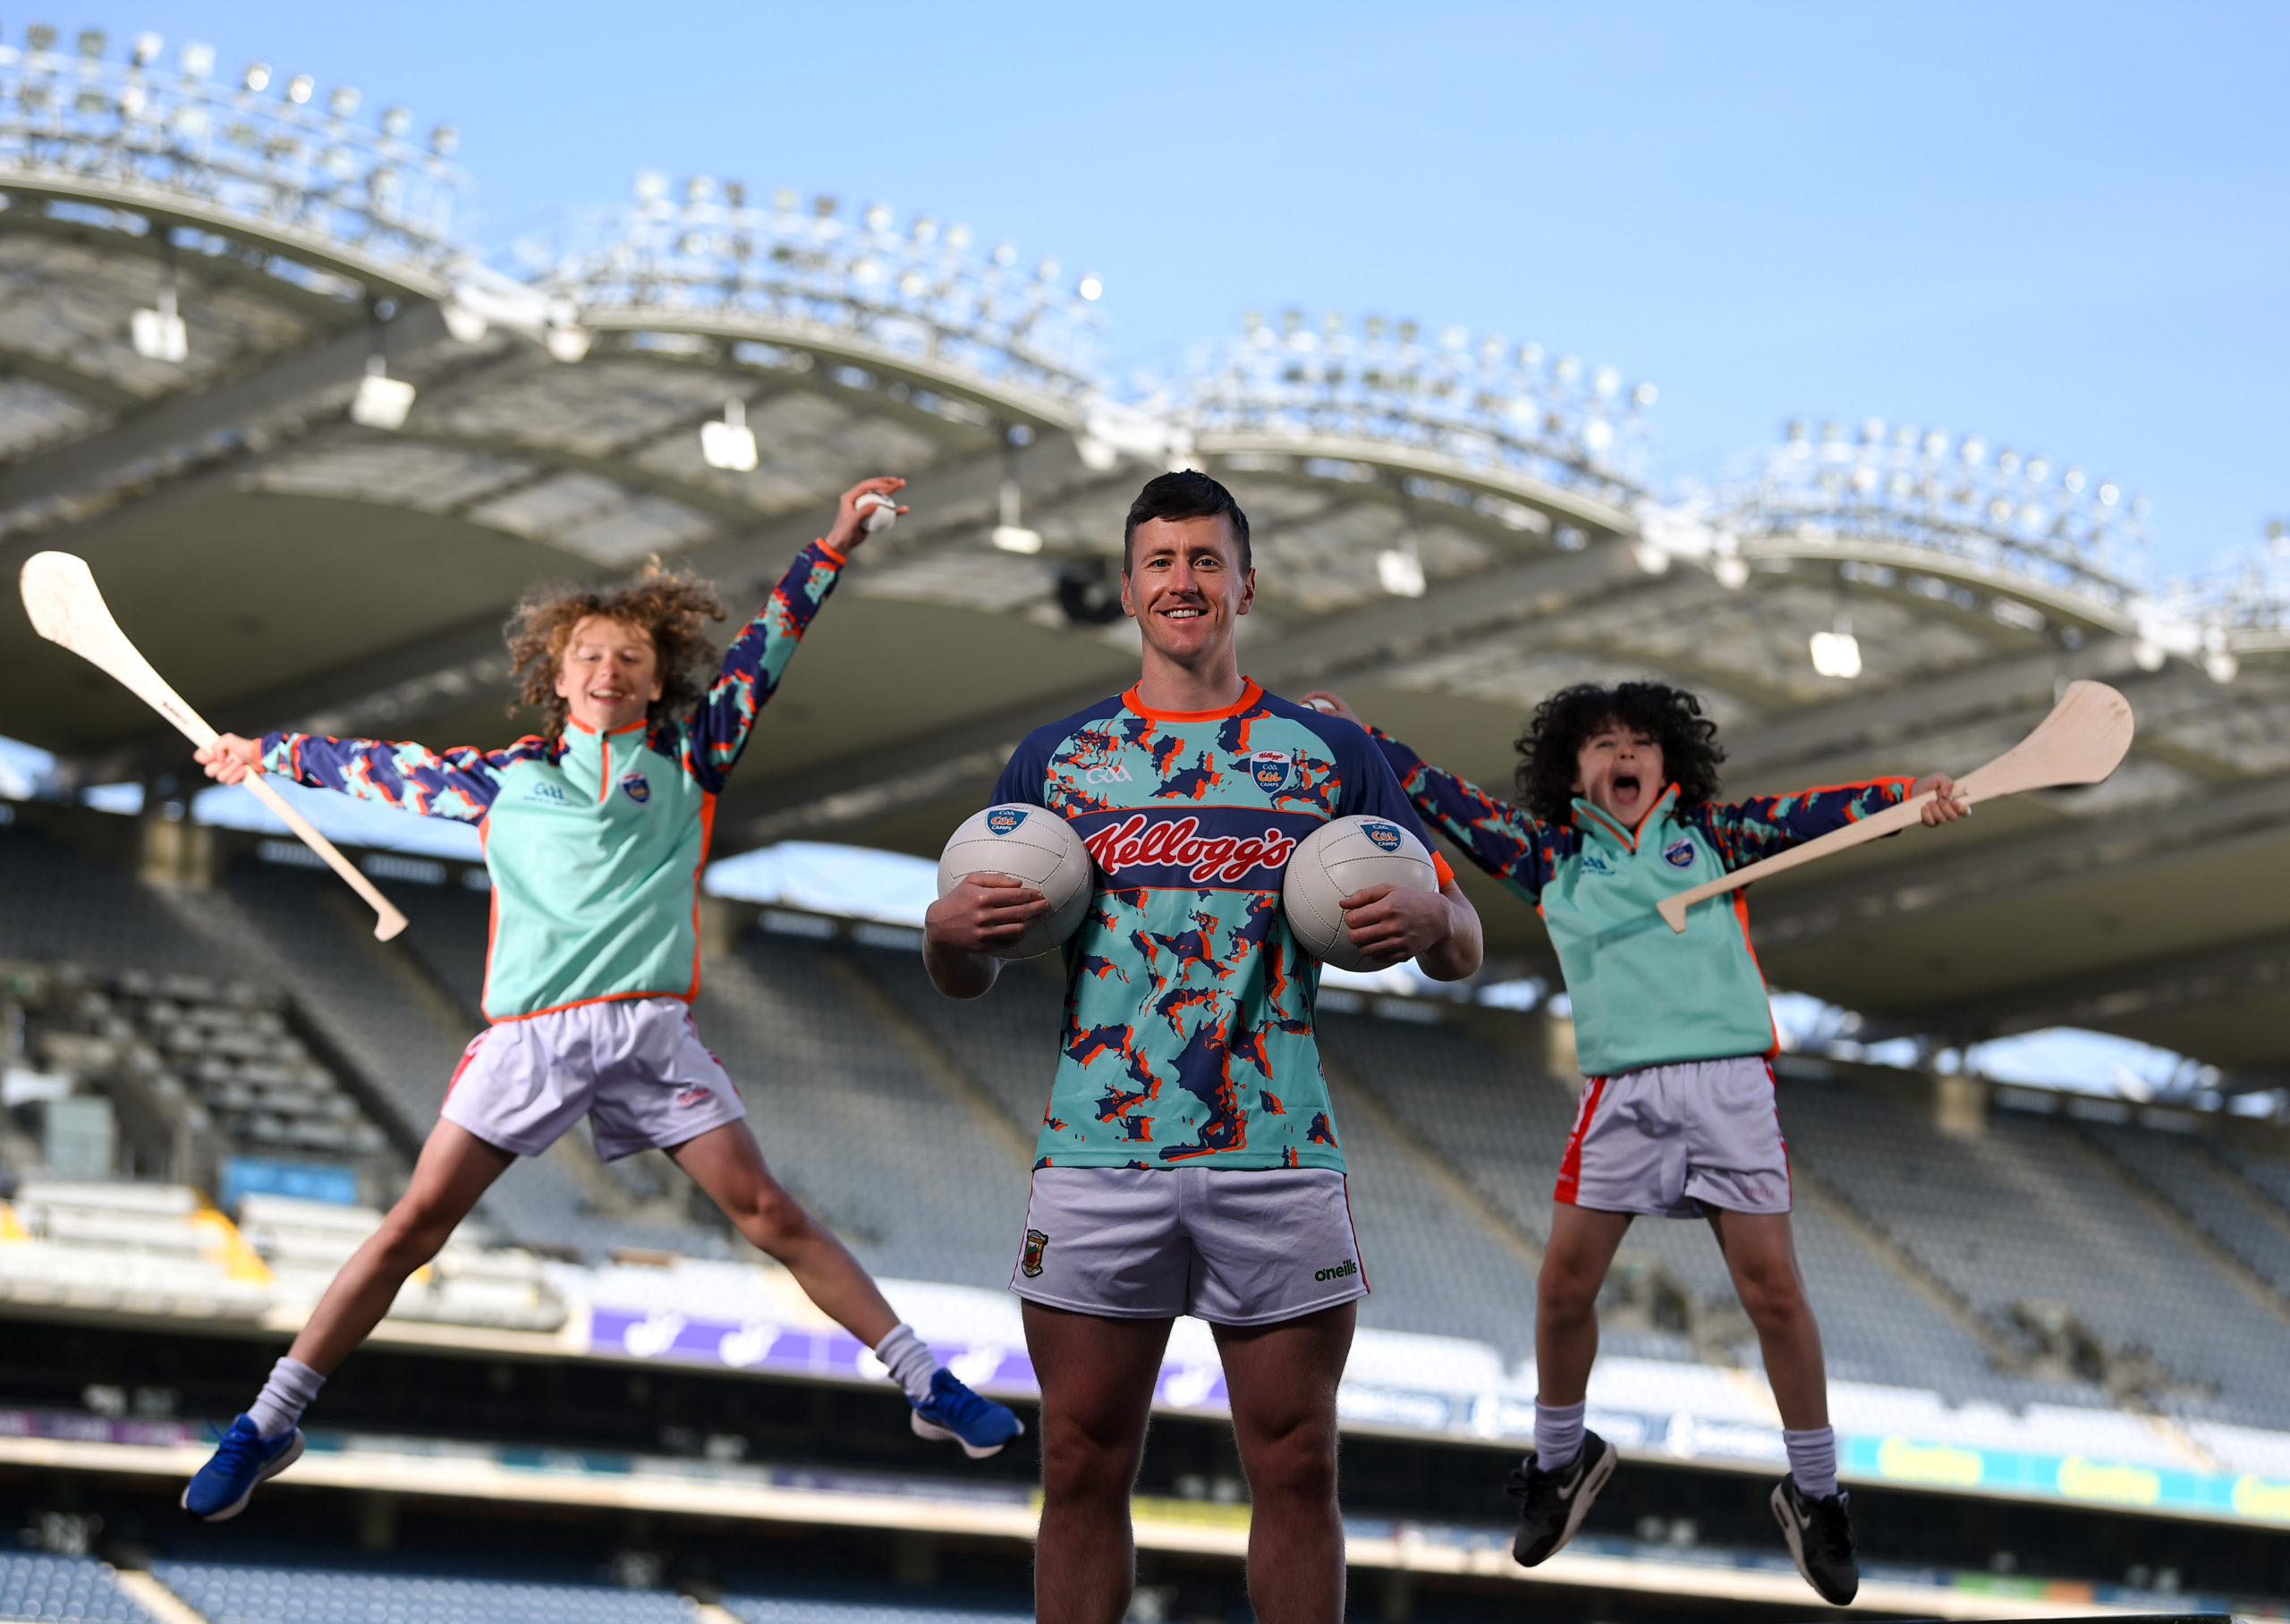 Kellogg launches nationwide competition with prizes worth €40,000 up for grabs for local GAA club